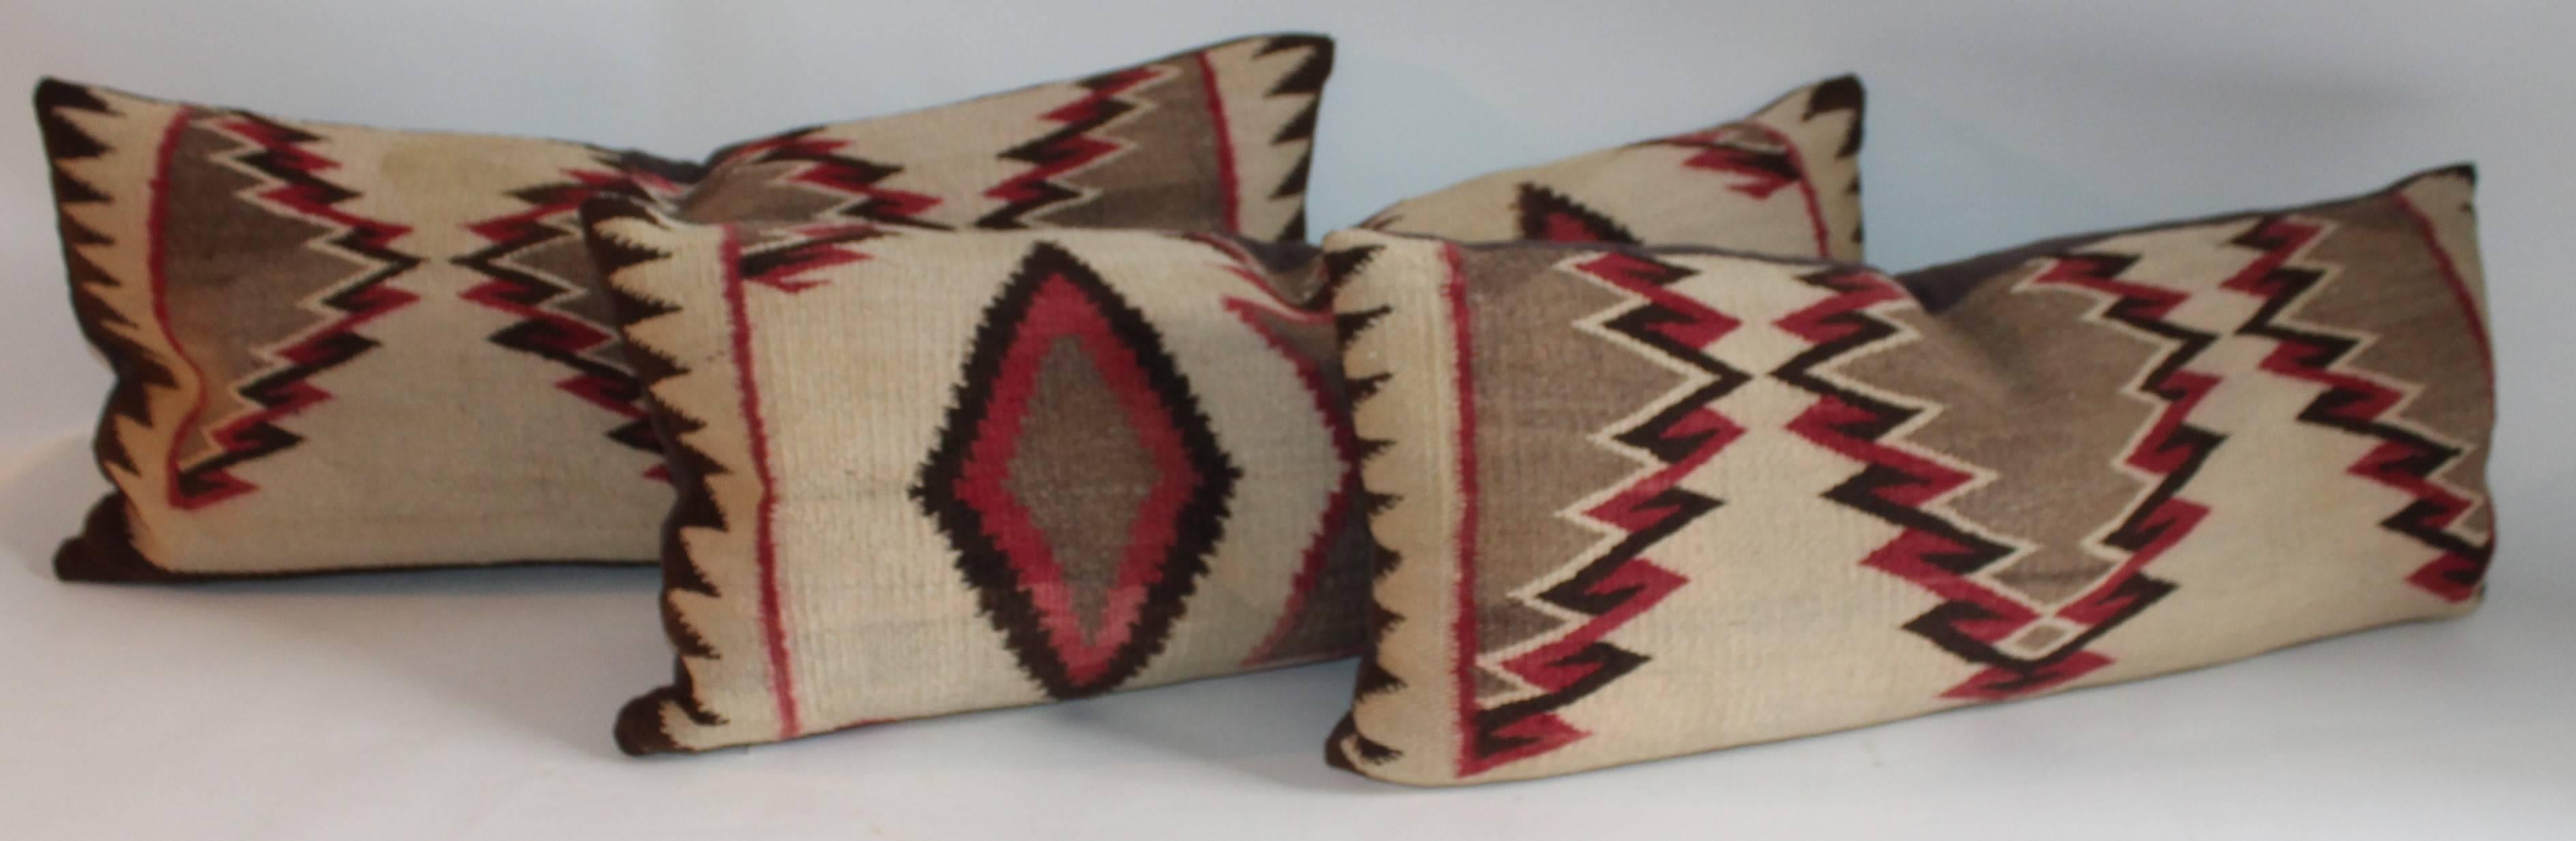 These very early saddle blanket weaving pillows are in good condition and have brown cotton linen backings. These Fine eye dazzler pillows are in such unusual colors. Sold as a group of three or 1195.00 each.